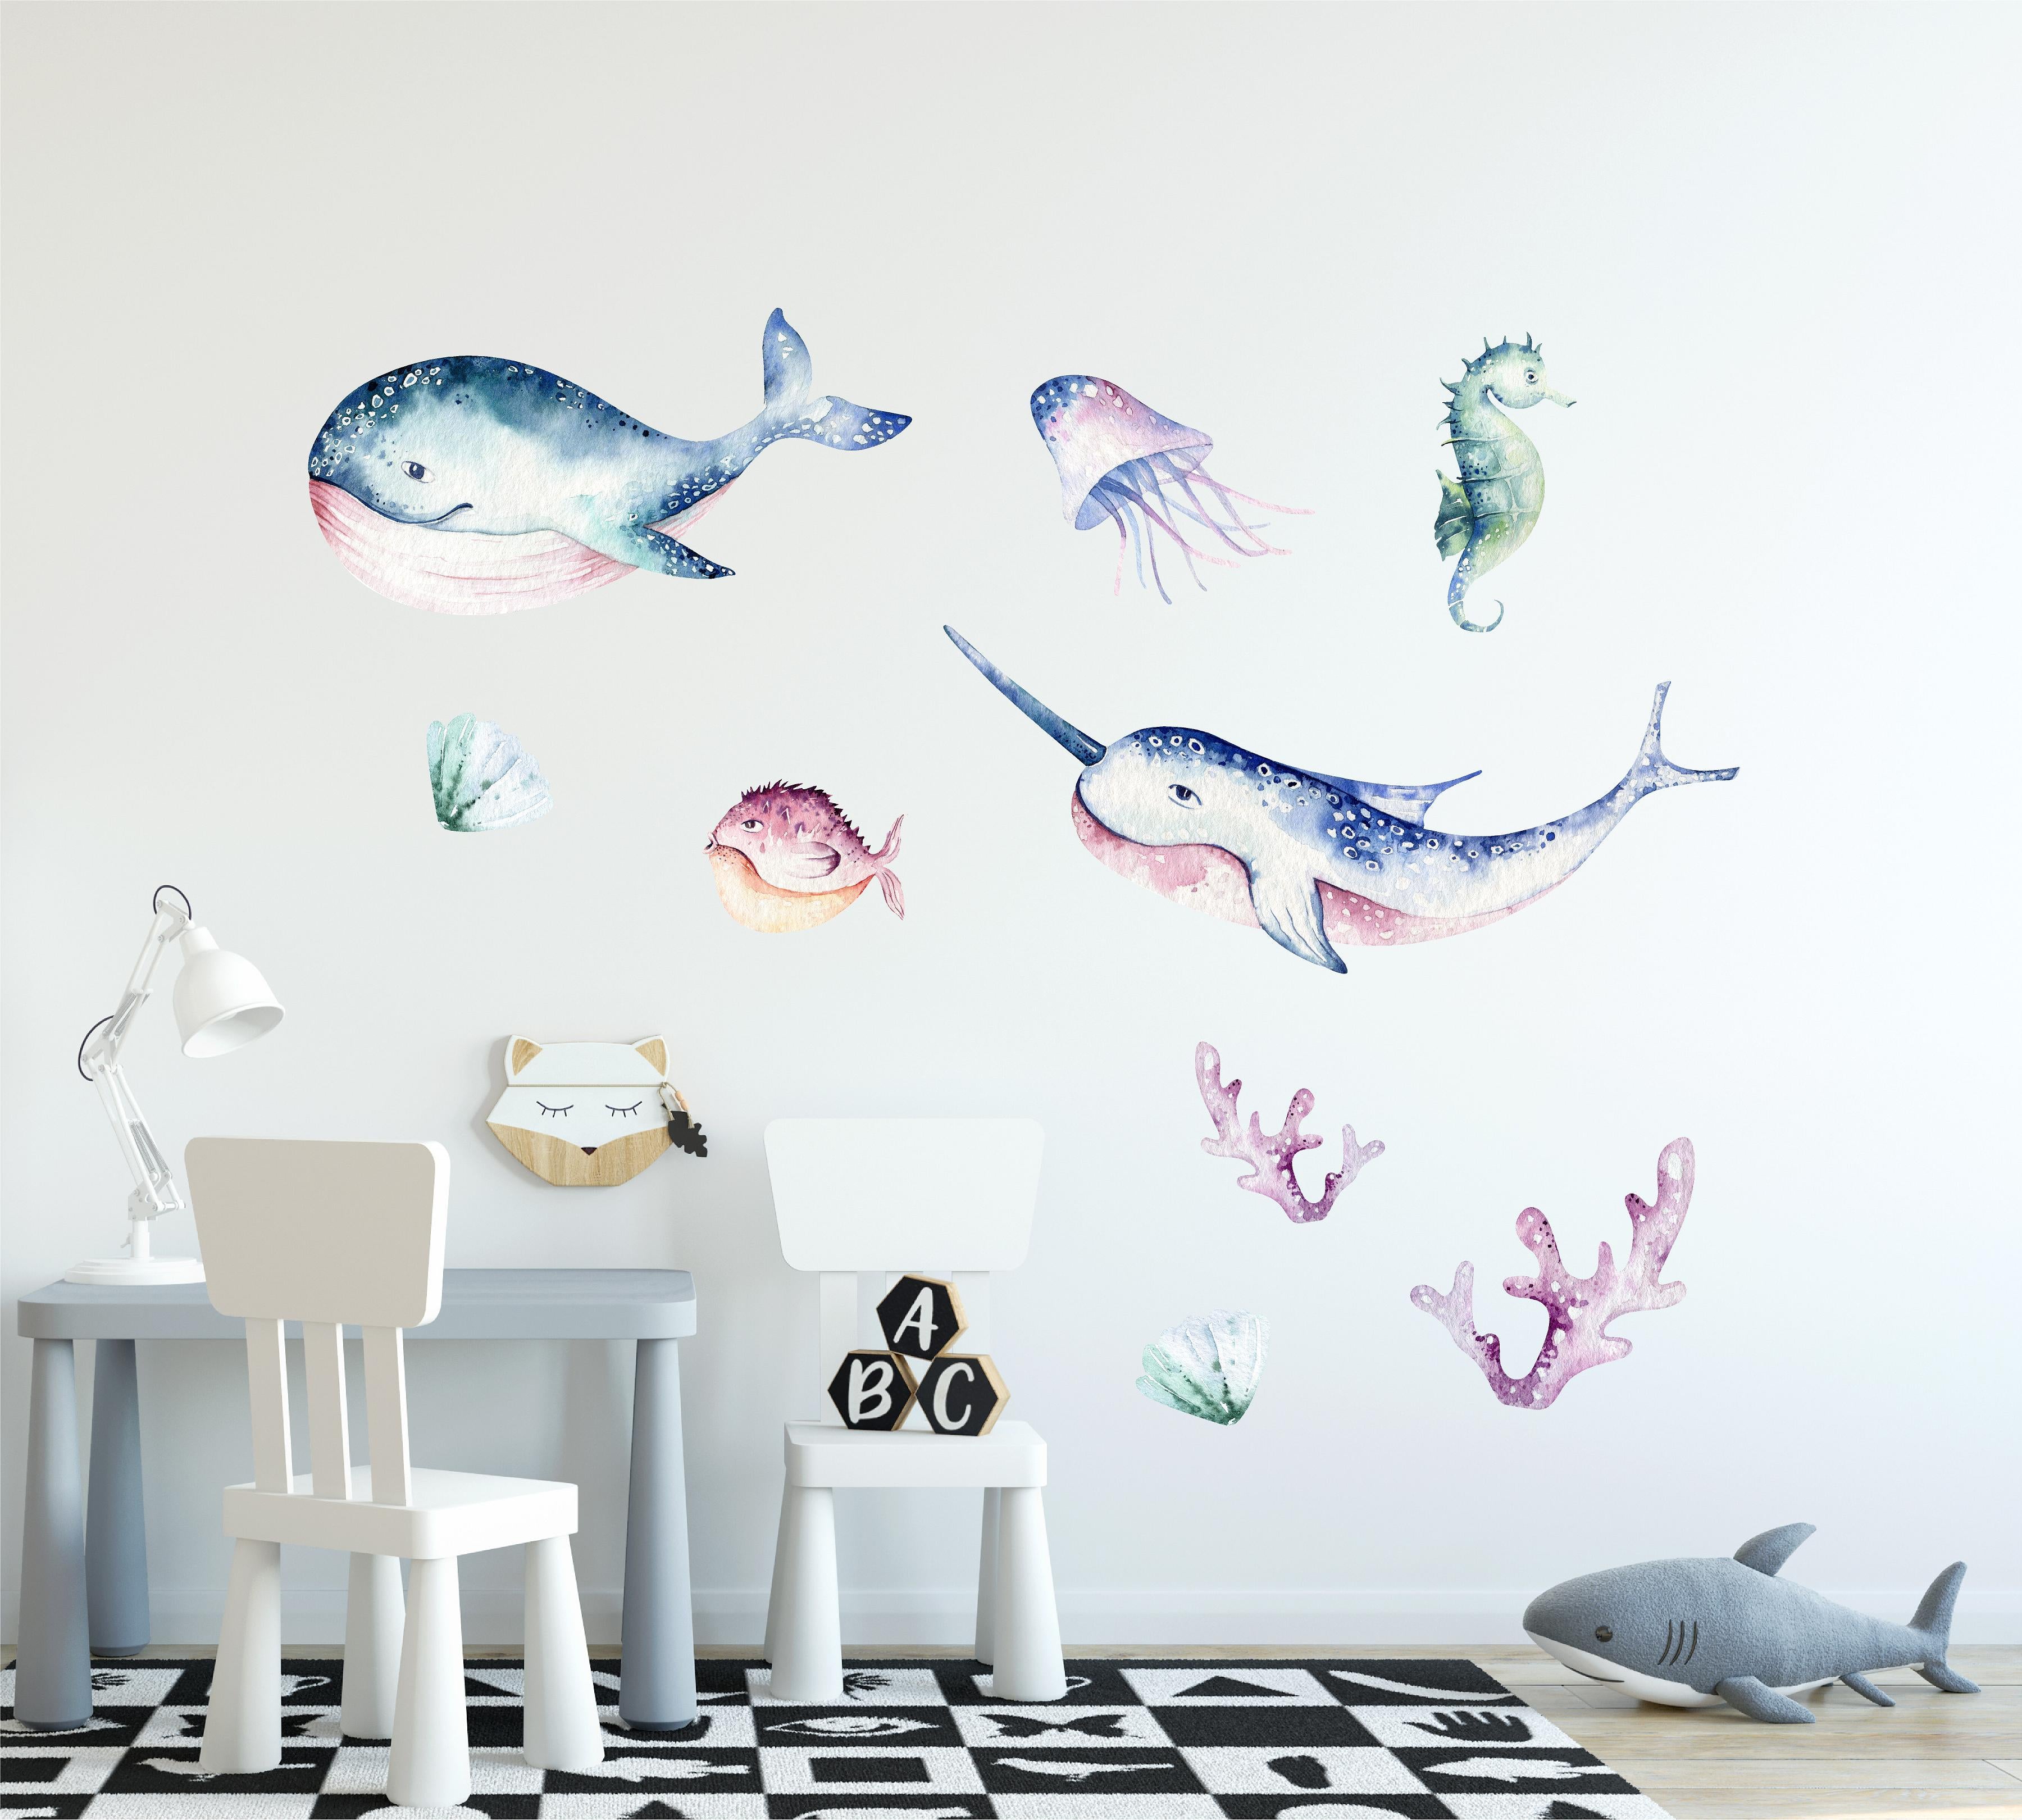 Whimsical Under The Sea Wall Decal Set #1 Ocean Sea Life Removable Fabric Wall Sticker | DecalBaby